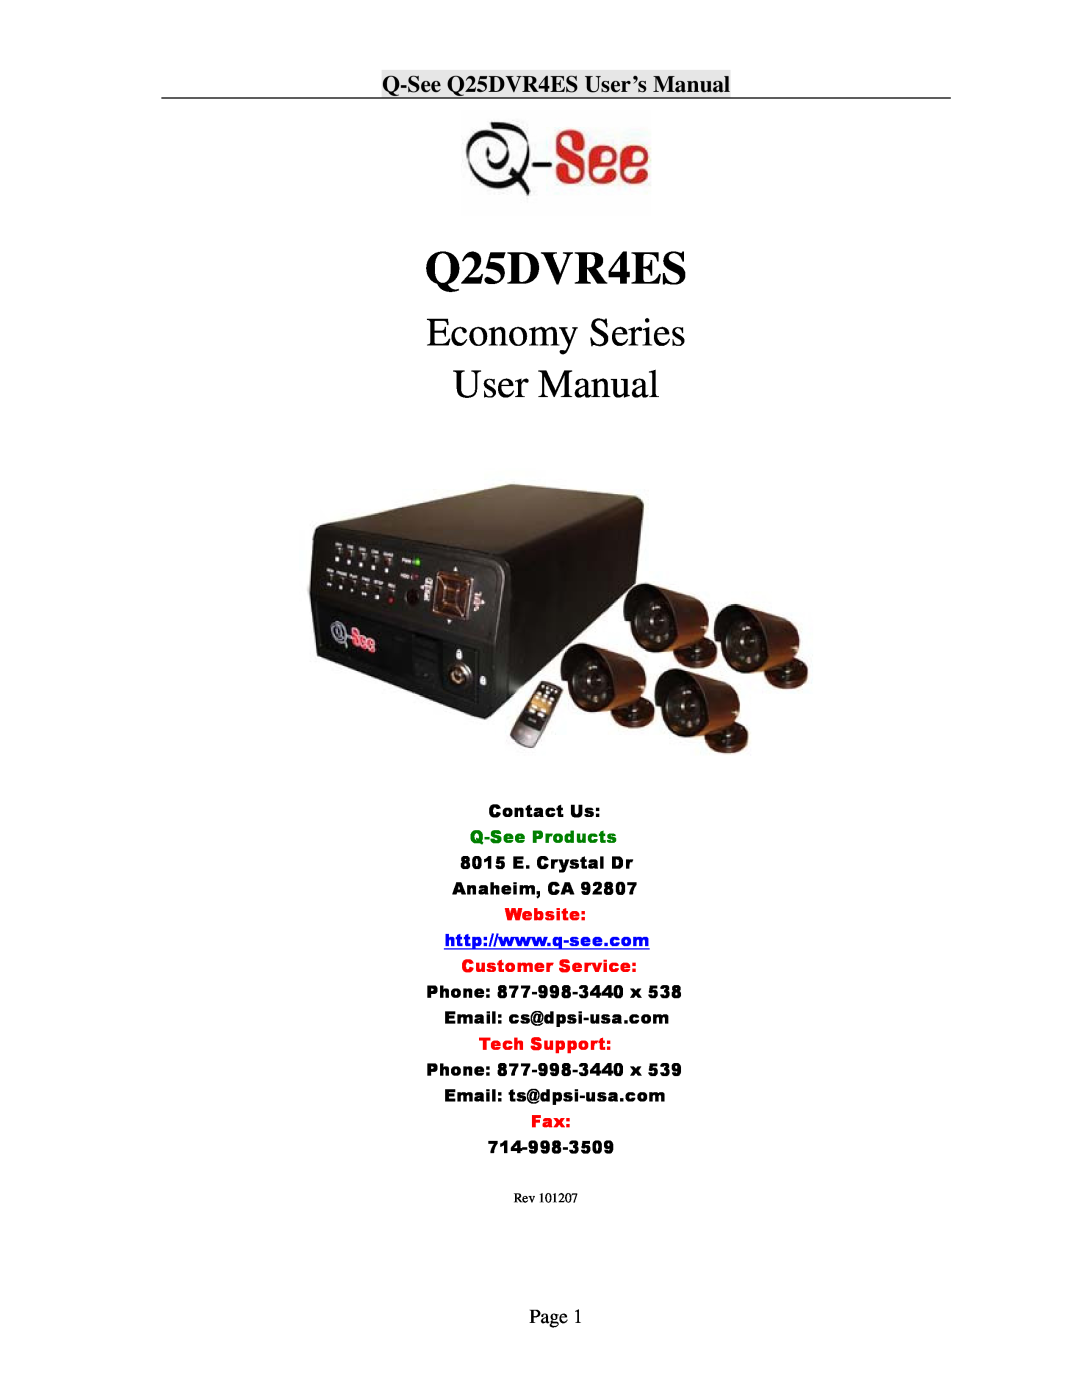 Q-See user manual Q-SeeQ25DVR4ES User’s Manual, Contact Us, Q-SeeProducts, 8015 E. Crystal Dr Anaheim, CA, Website 